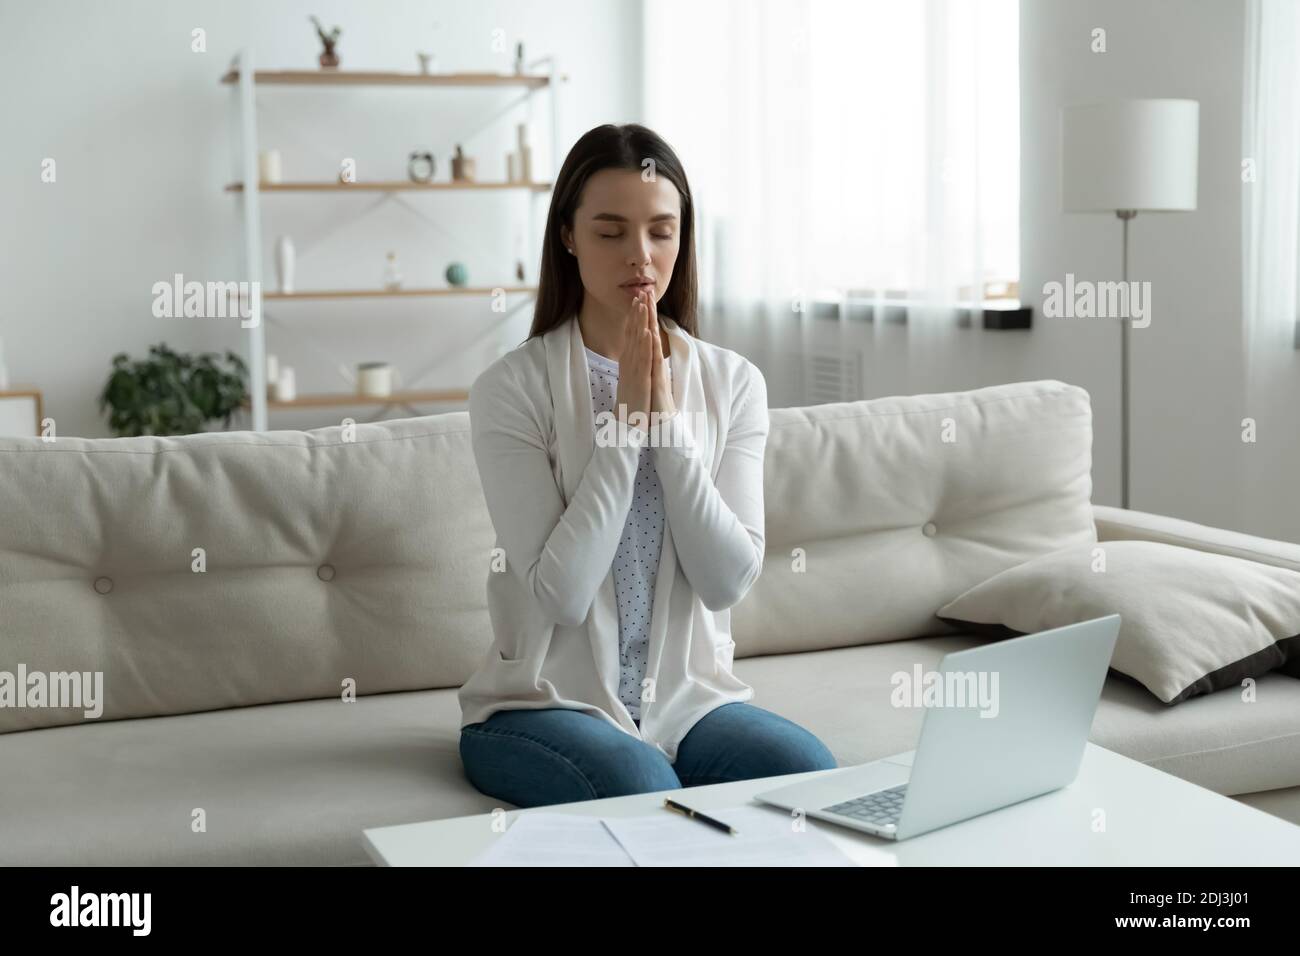 Calm young woman joining hands in prayer, asking help Stock Photo